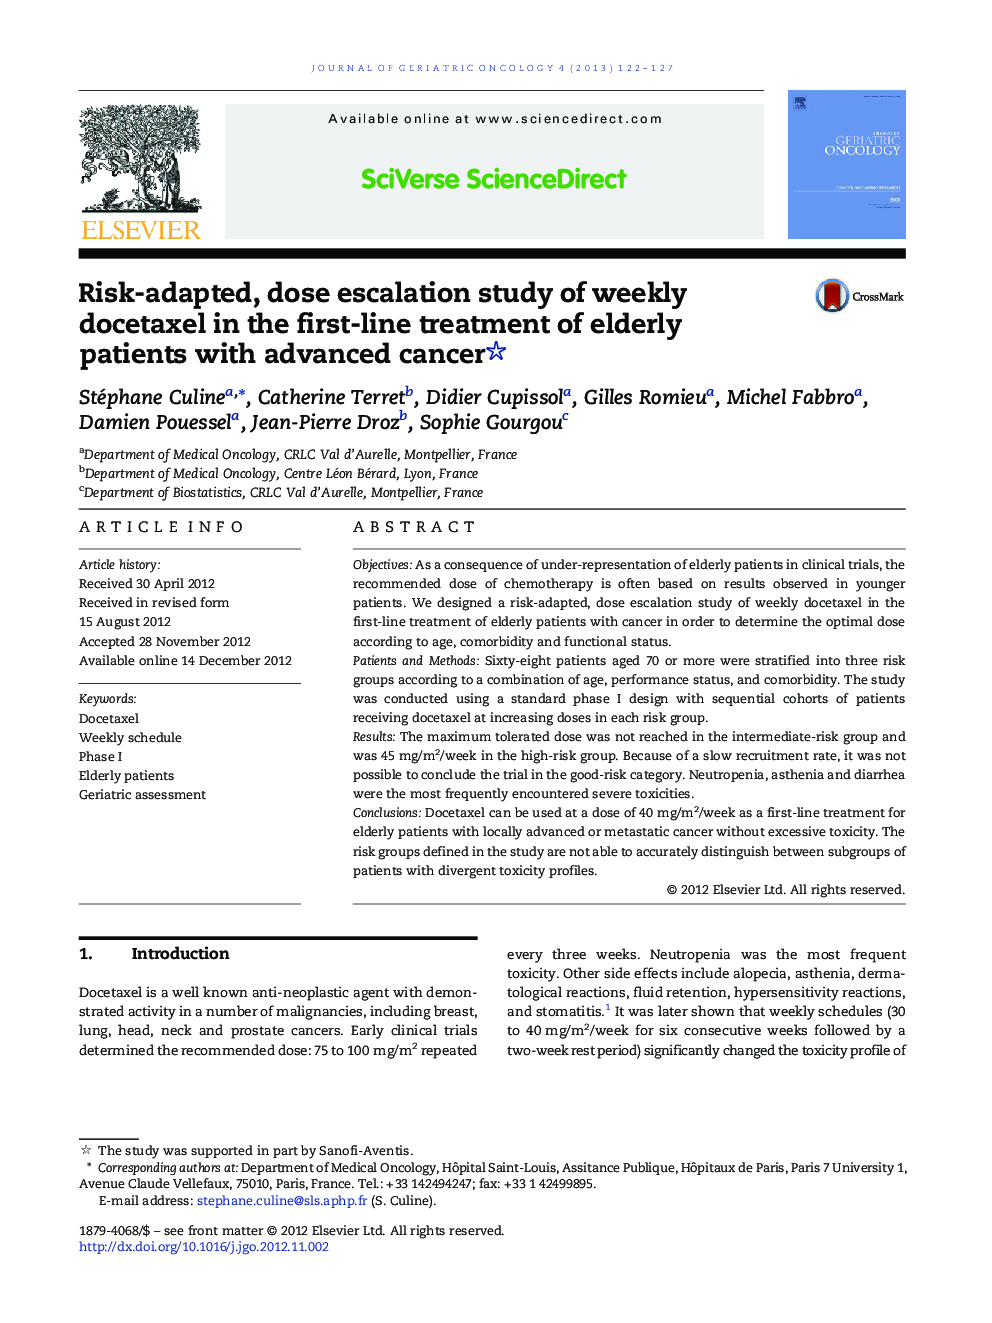 Risk-adapted, dose escalation study of weekly docetaxel in the first-line treatment of elderly patients with advanced cancer 